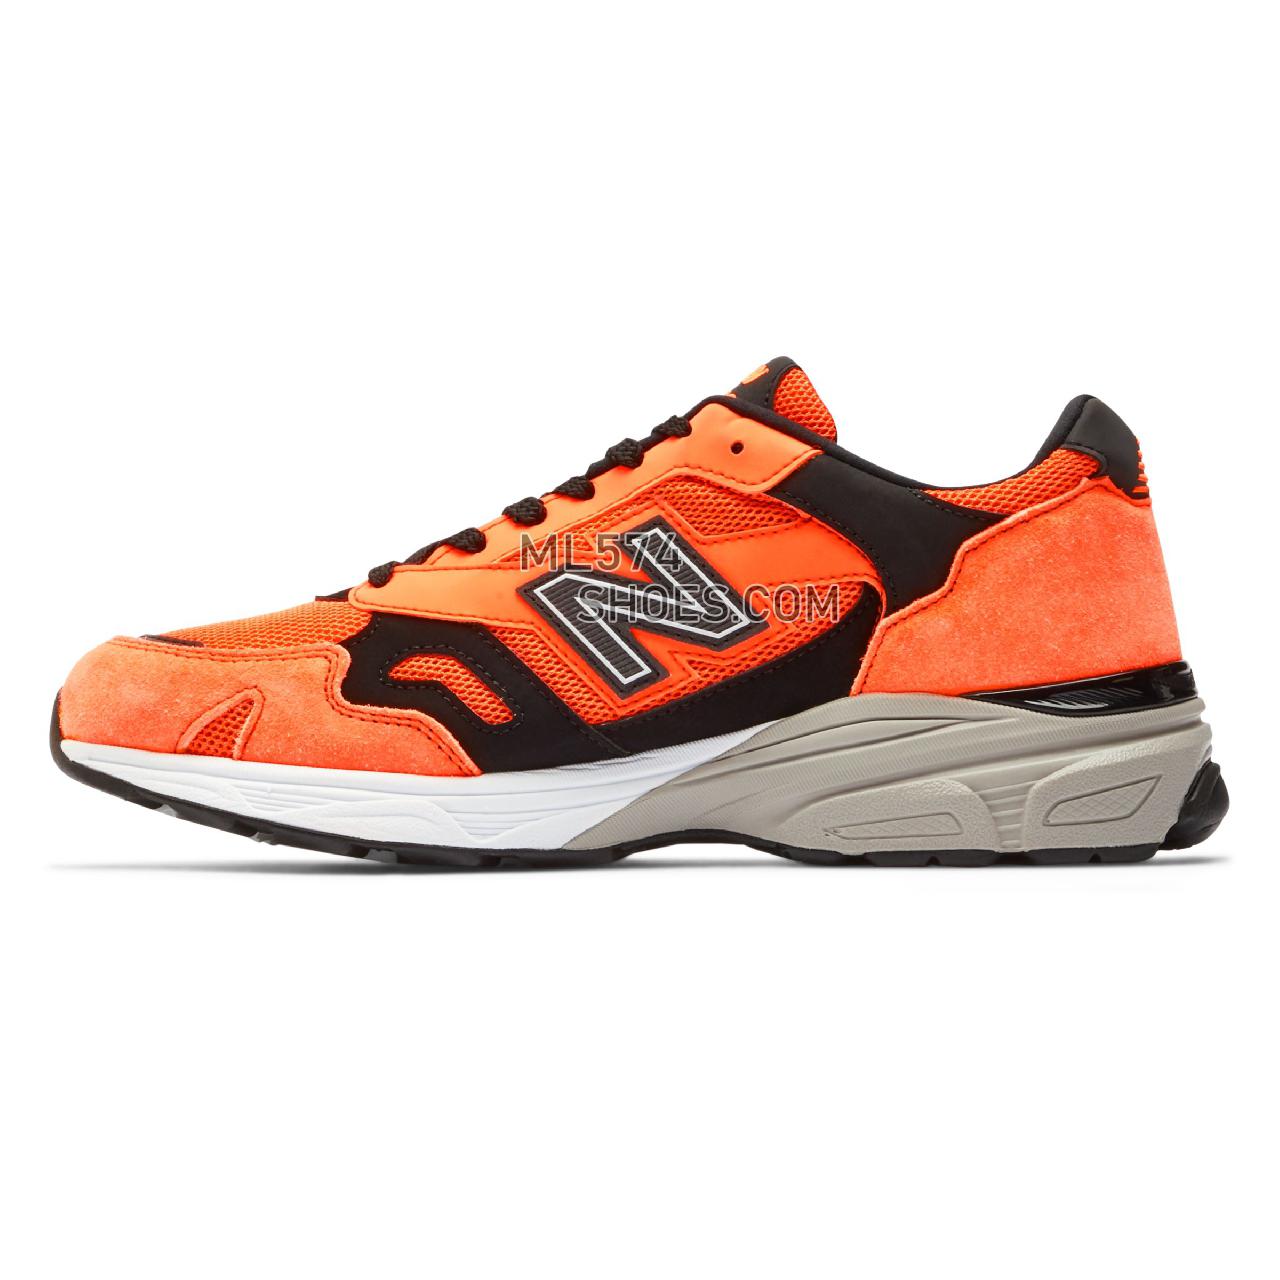 New Balance Made in UK 920 - Men's Made in USA And UK Sneakers - Orange with Black and White - M920NEO